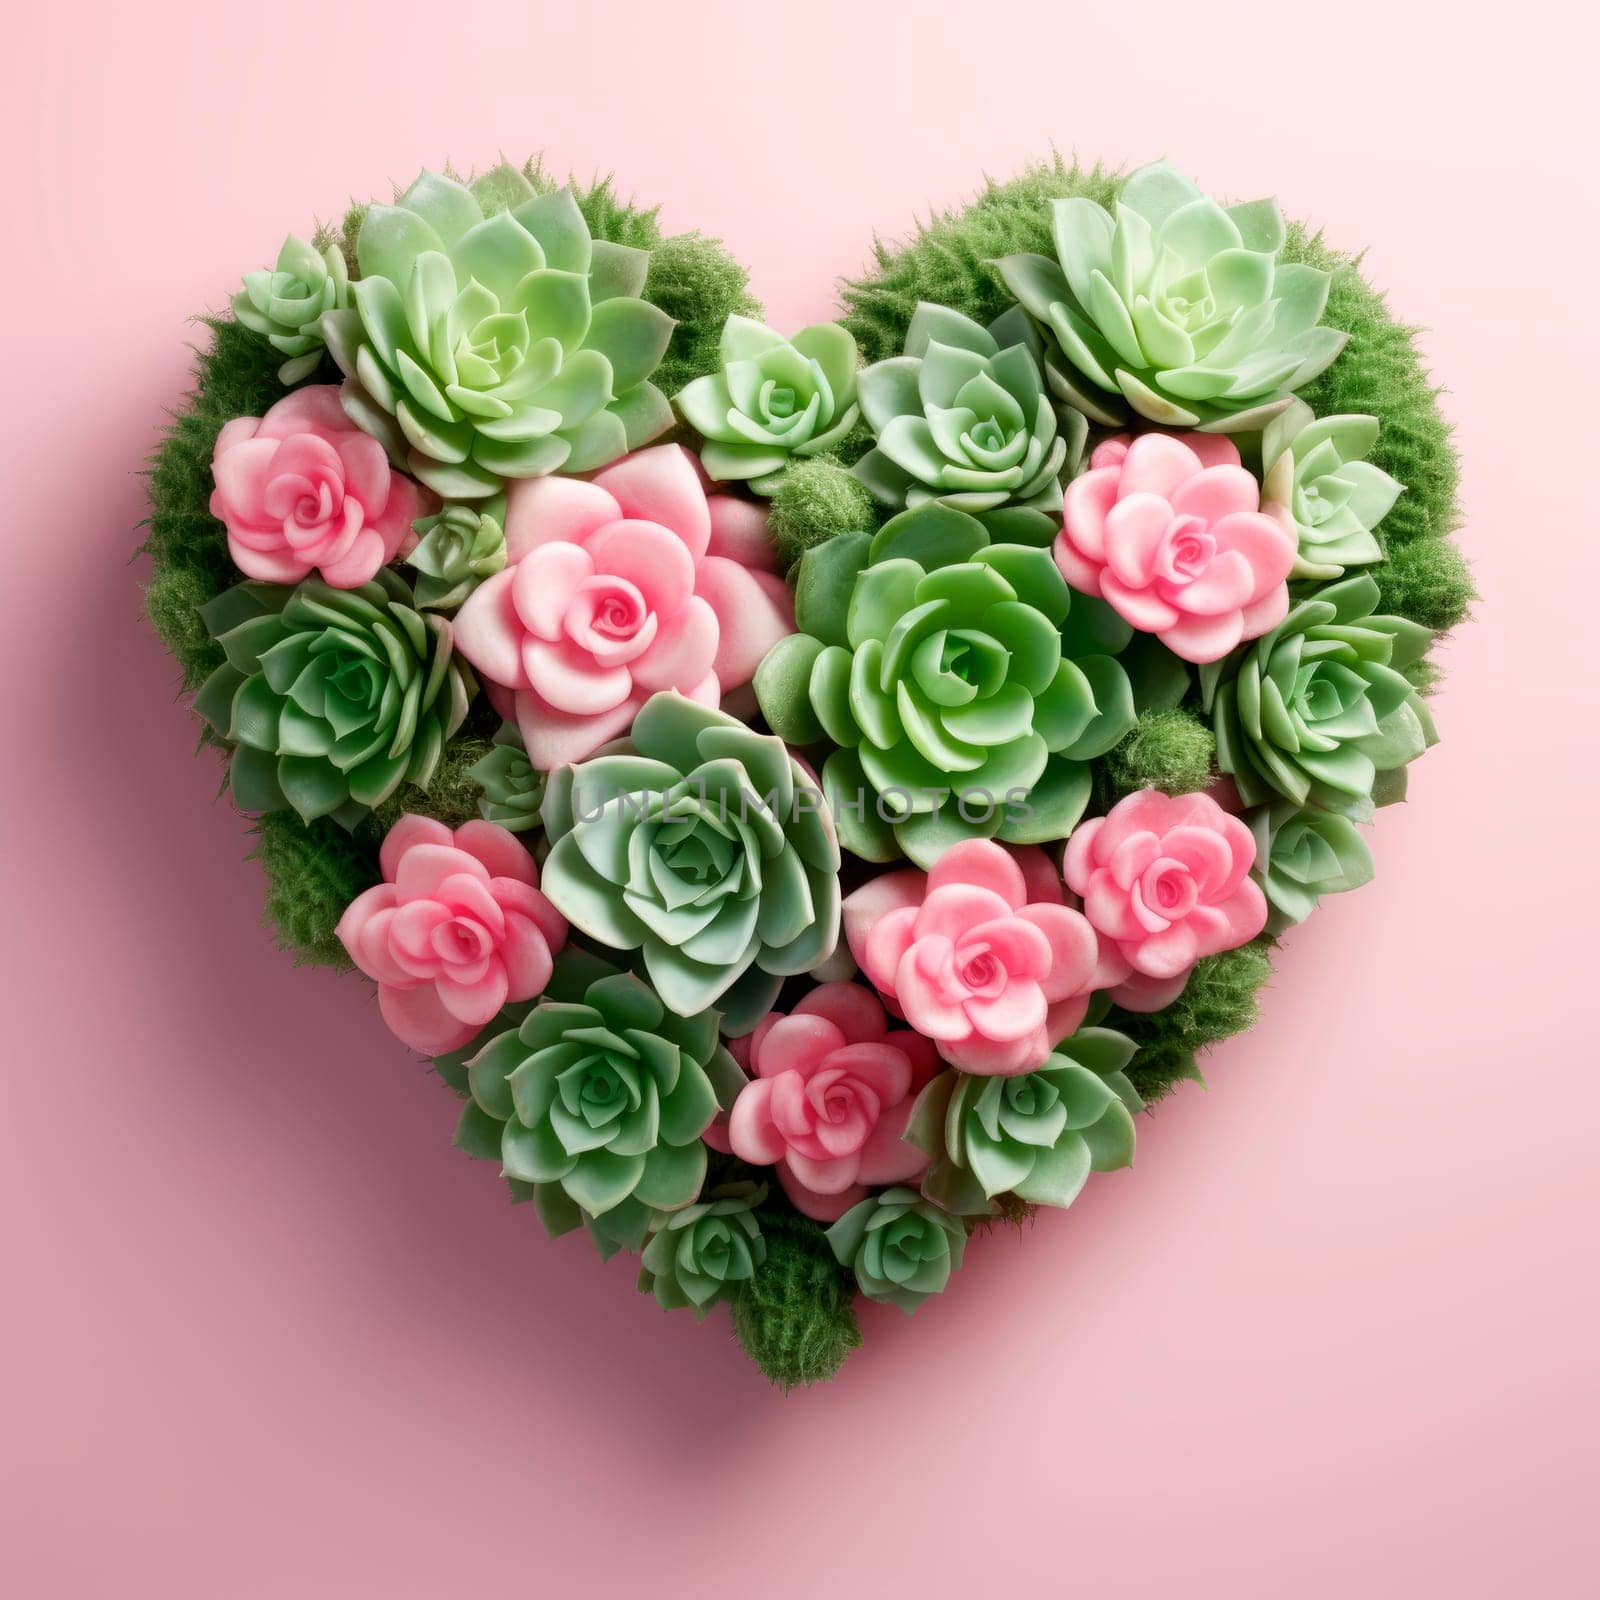 The heart is lined with beautiful succulents on a light pink background by Spirina